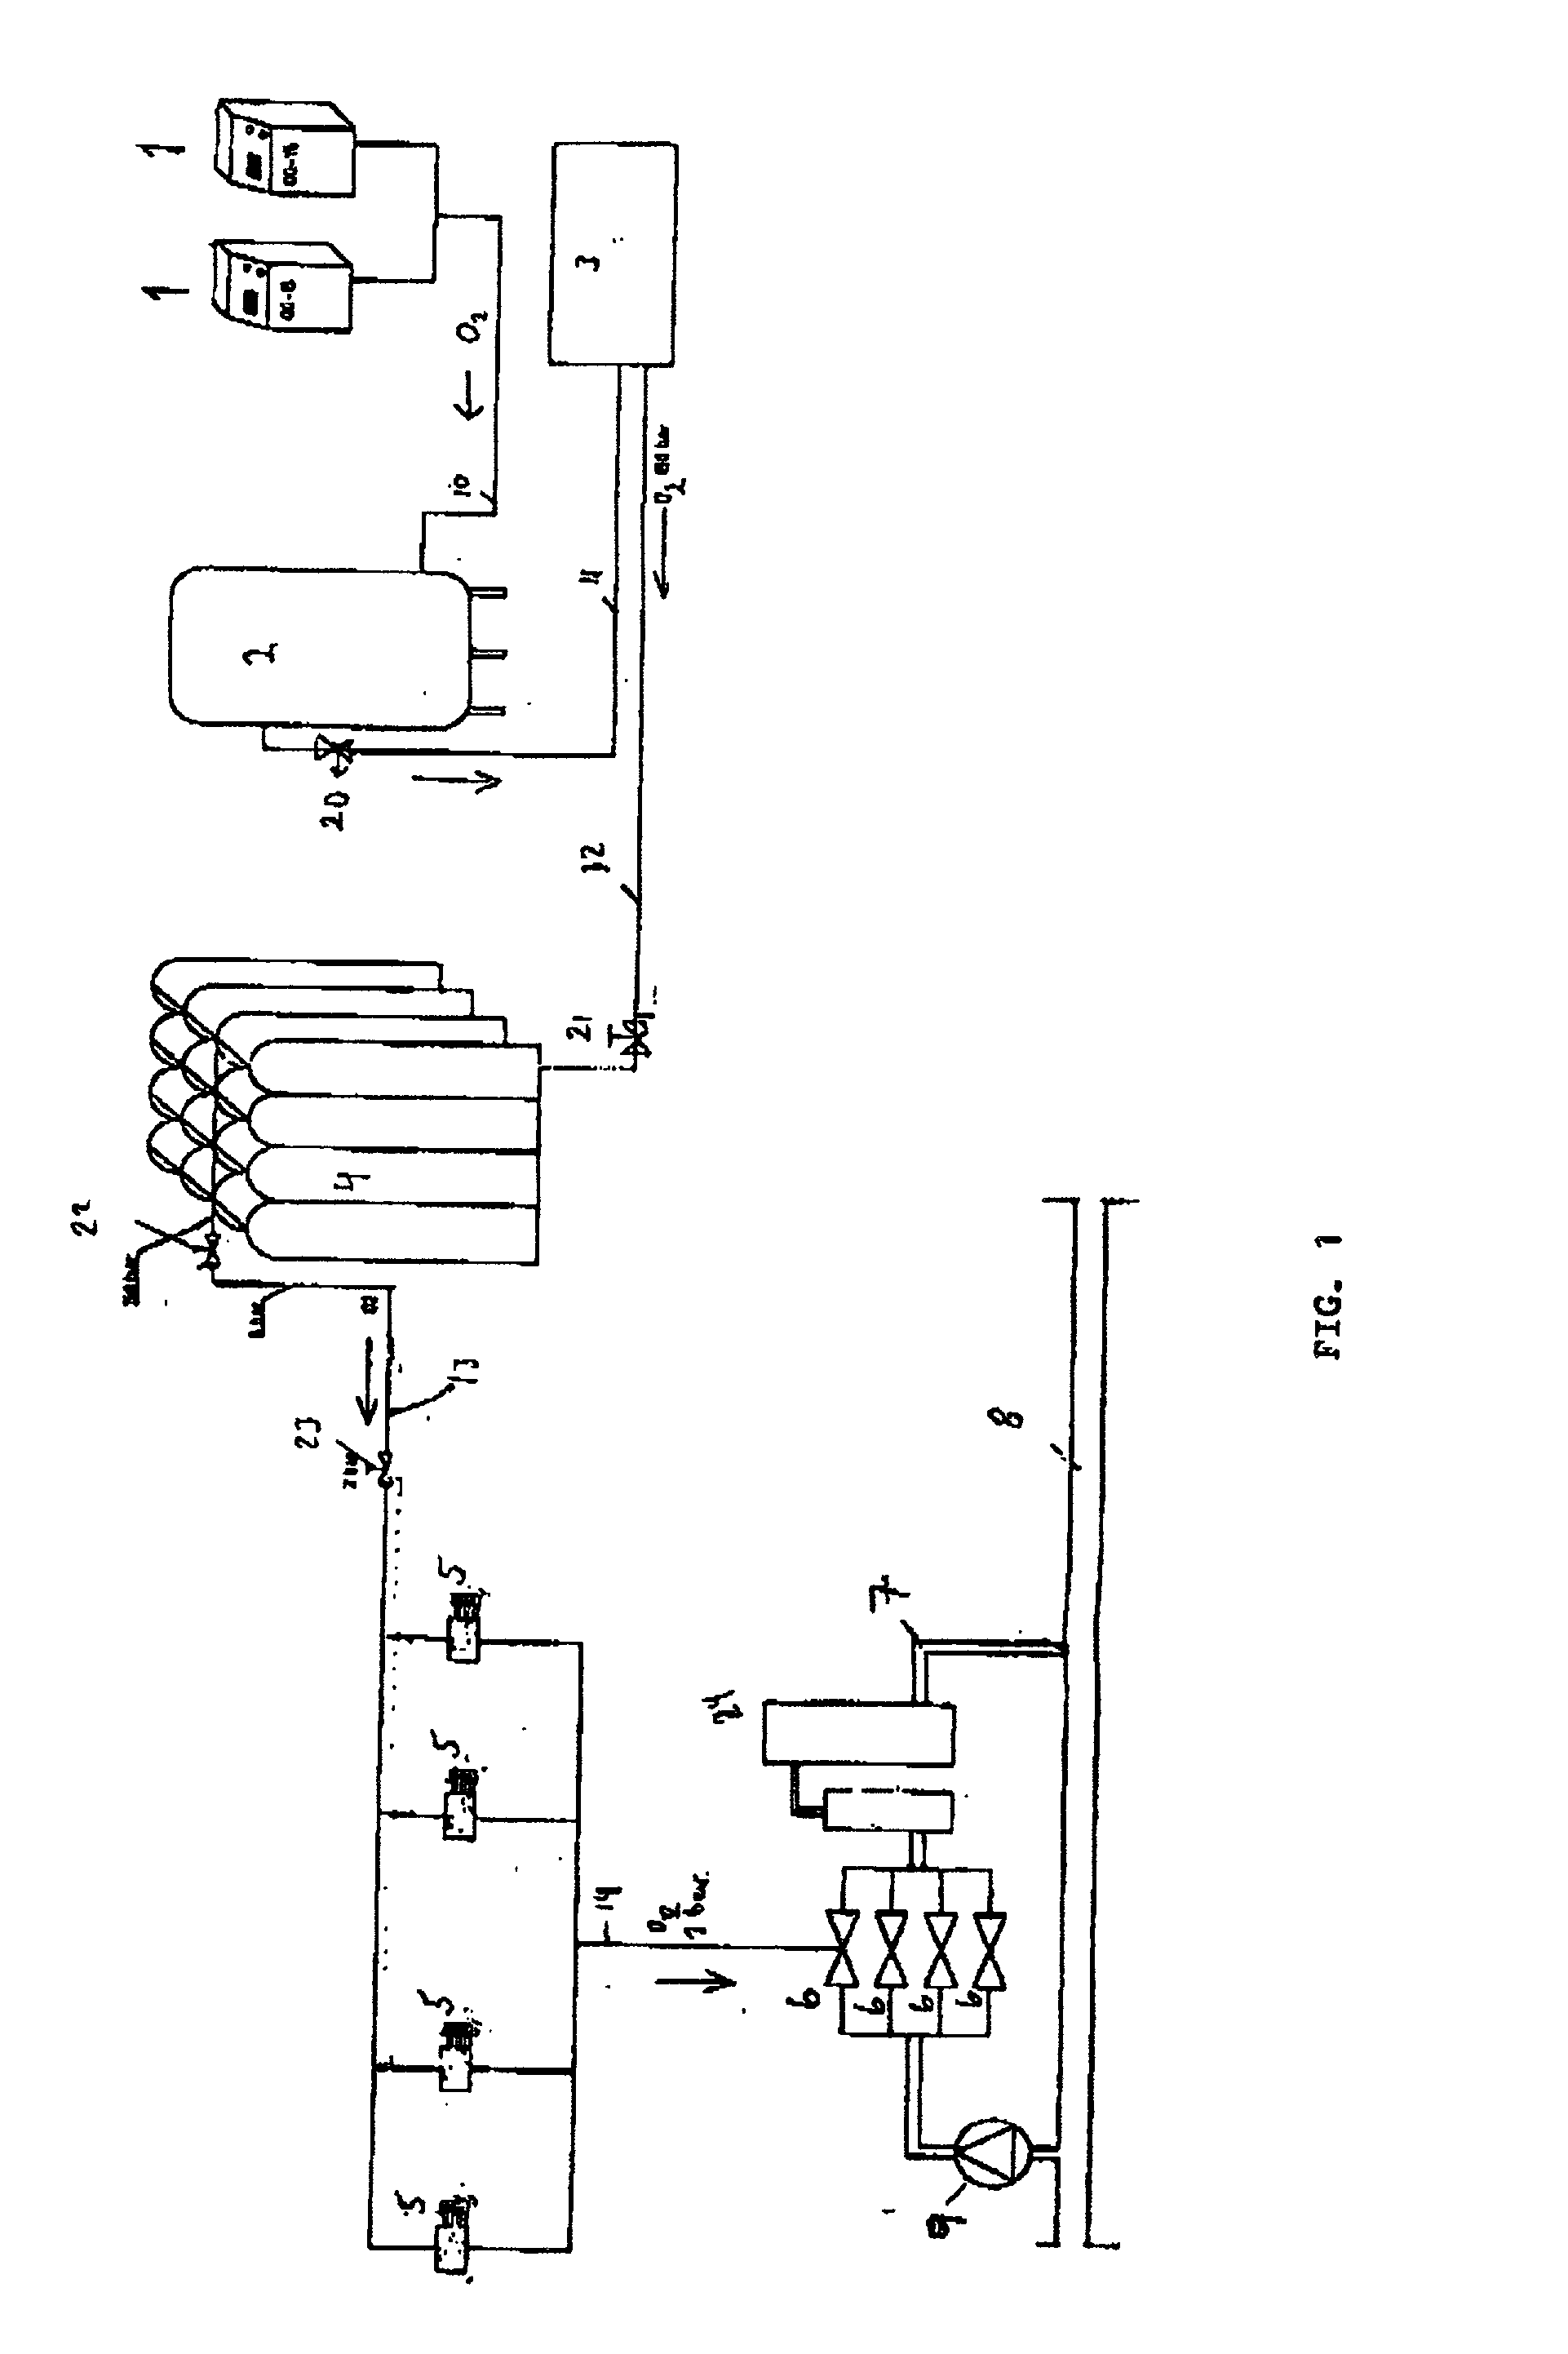 Method and apparatus for treating/disinfecting ballast water in ships